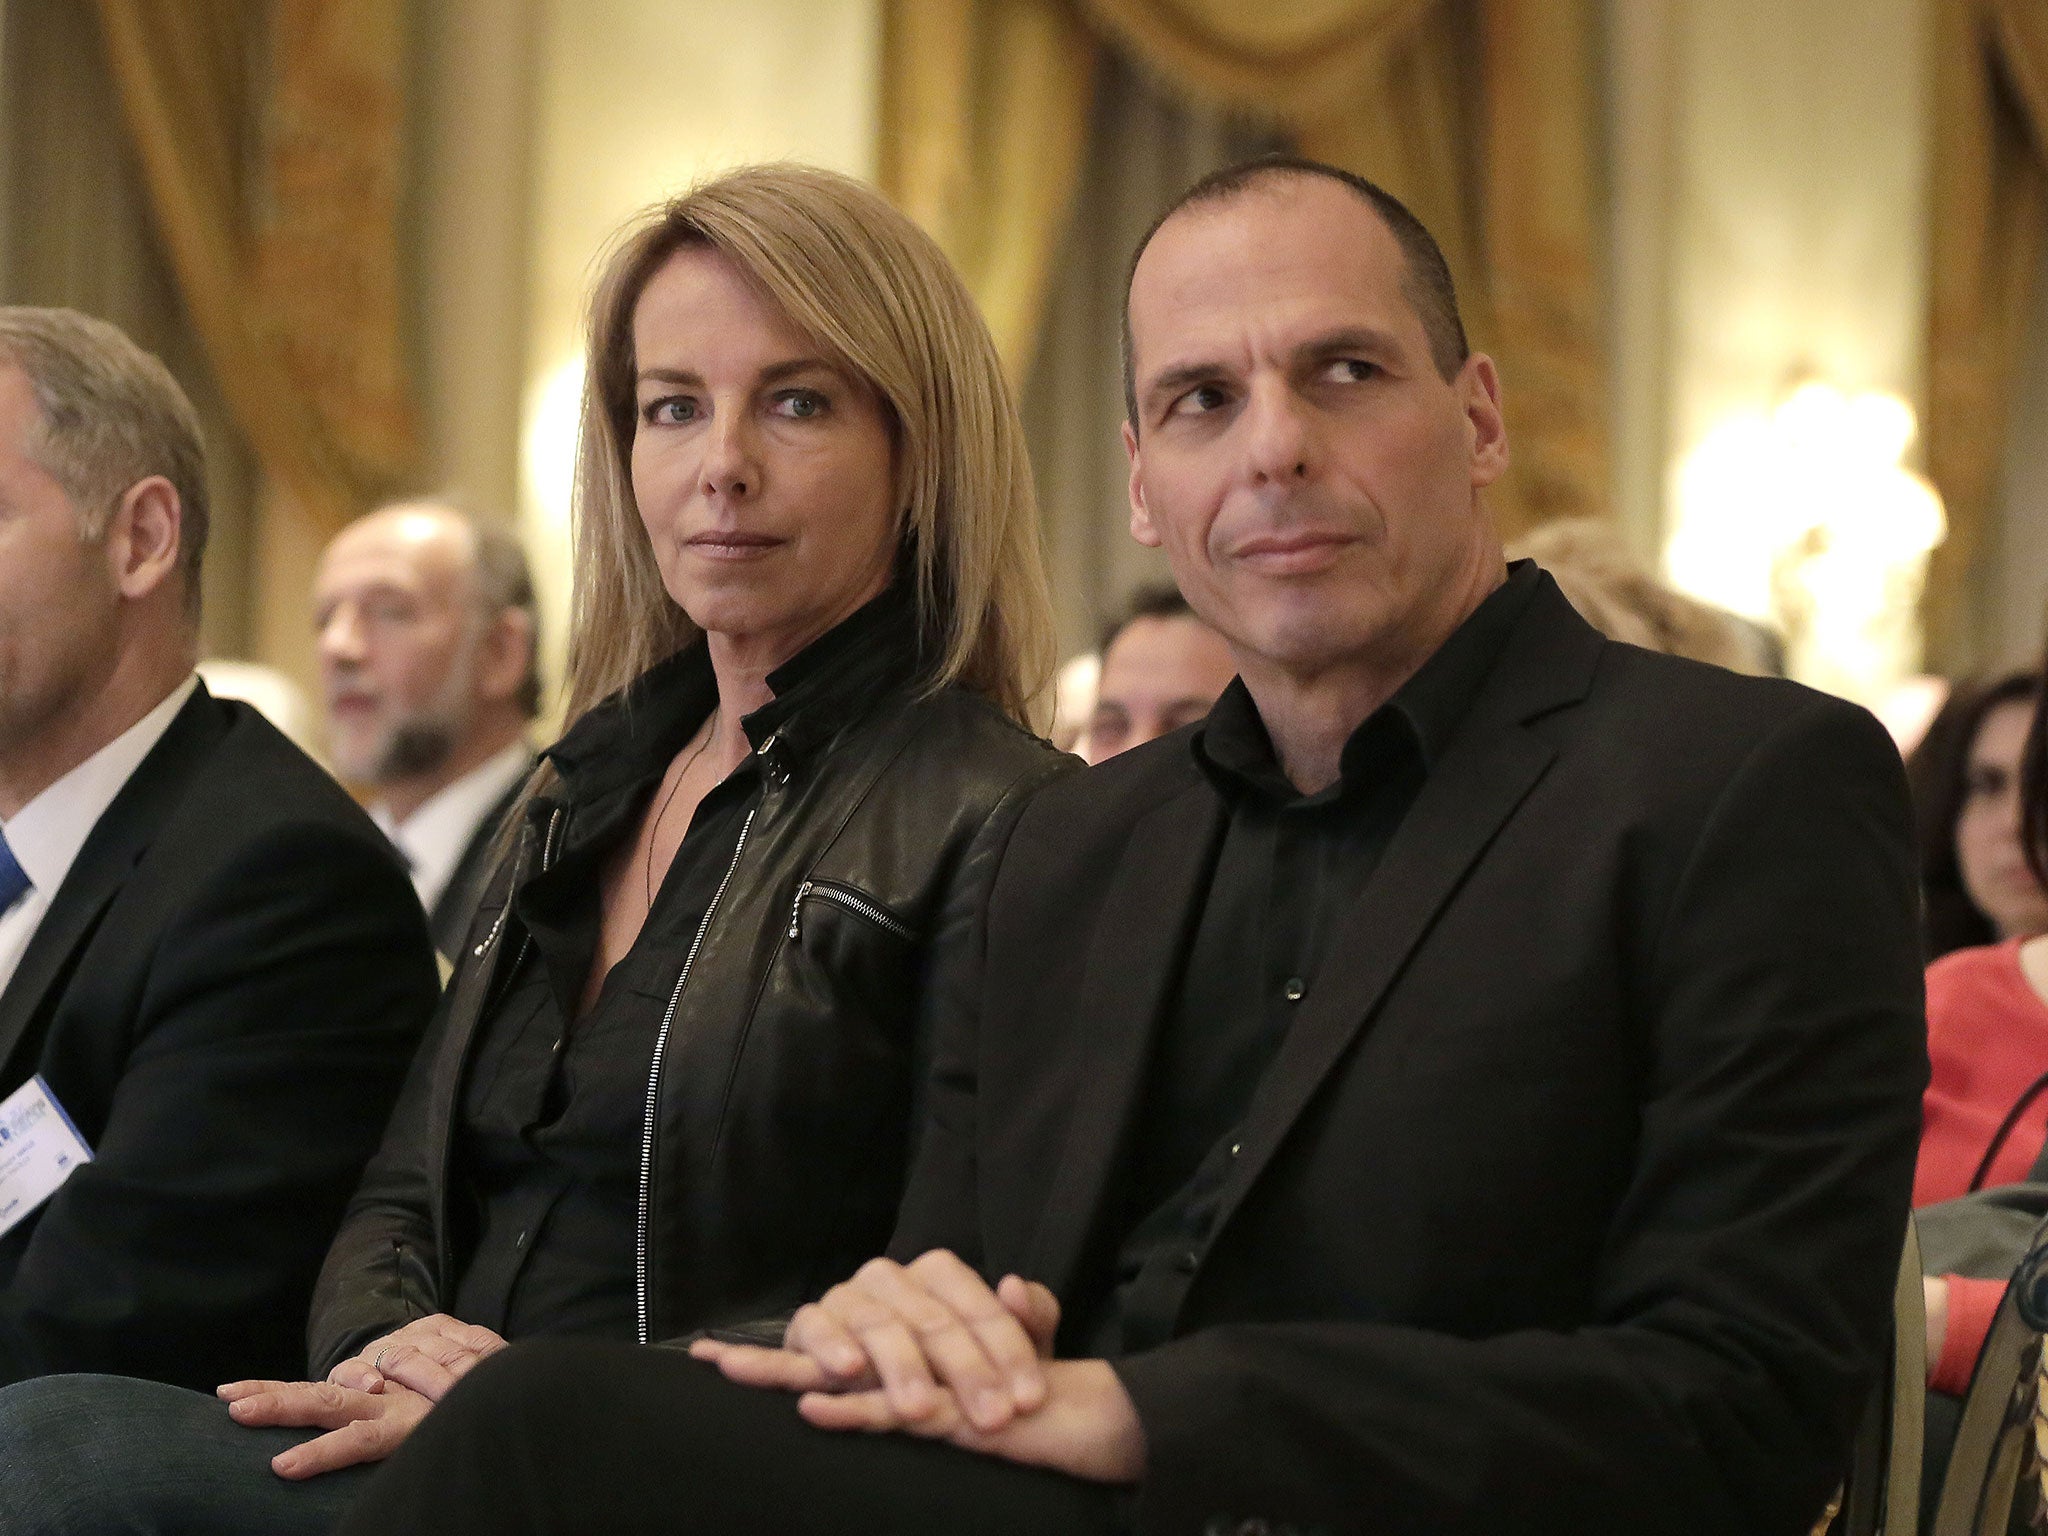 File: Greek Finance Minister Yanis Varoufakis, right, attends a banking conference in Athens with his wife Danae Stratou on 21 April